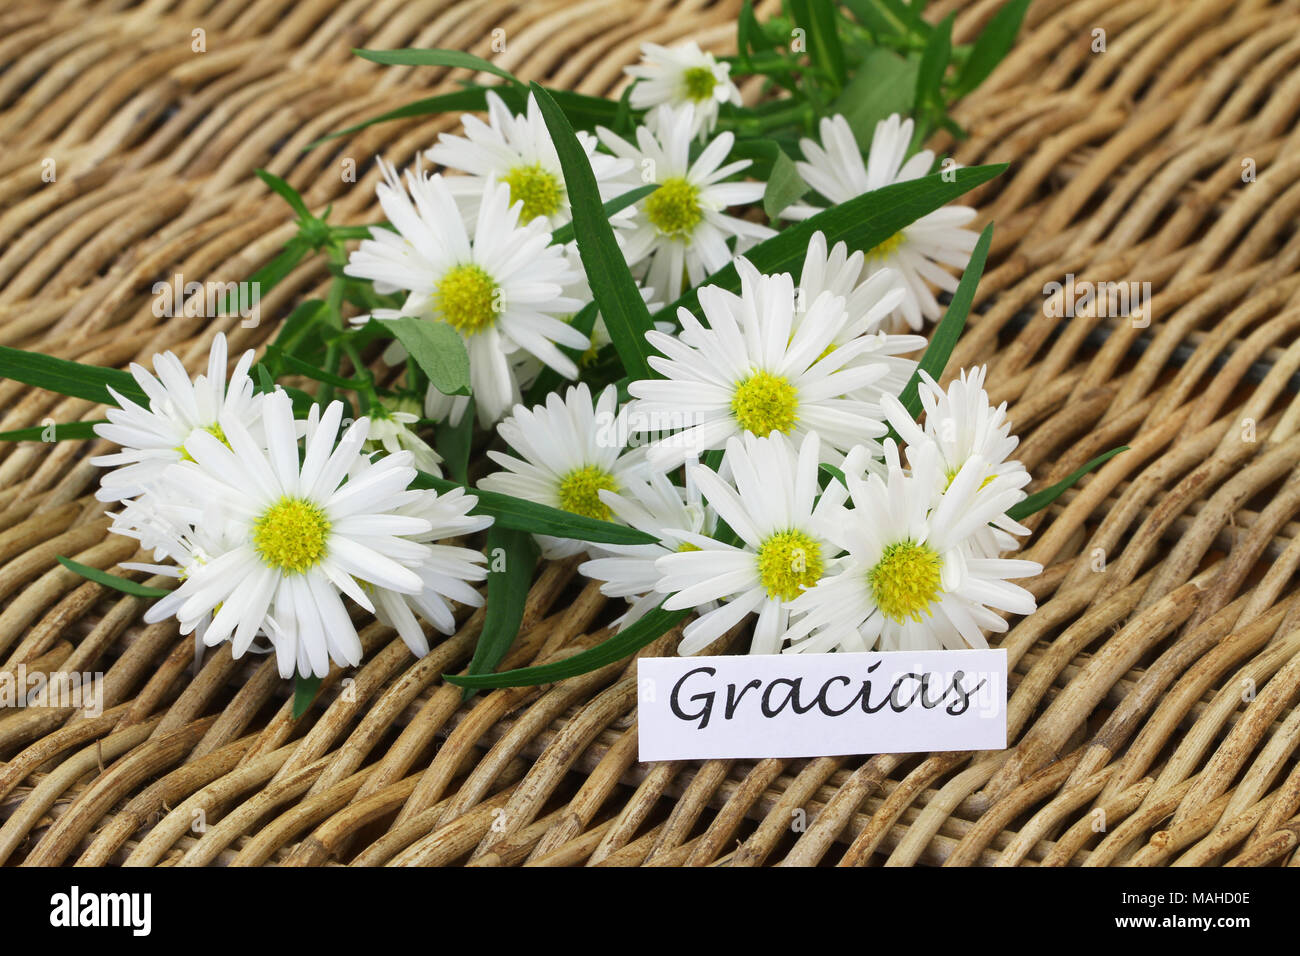 Gracias (thank you in Spanish) card with chamomile flowers on wicker surface Stock Photo